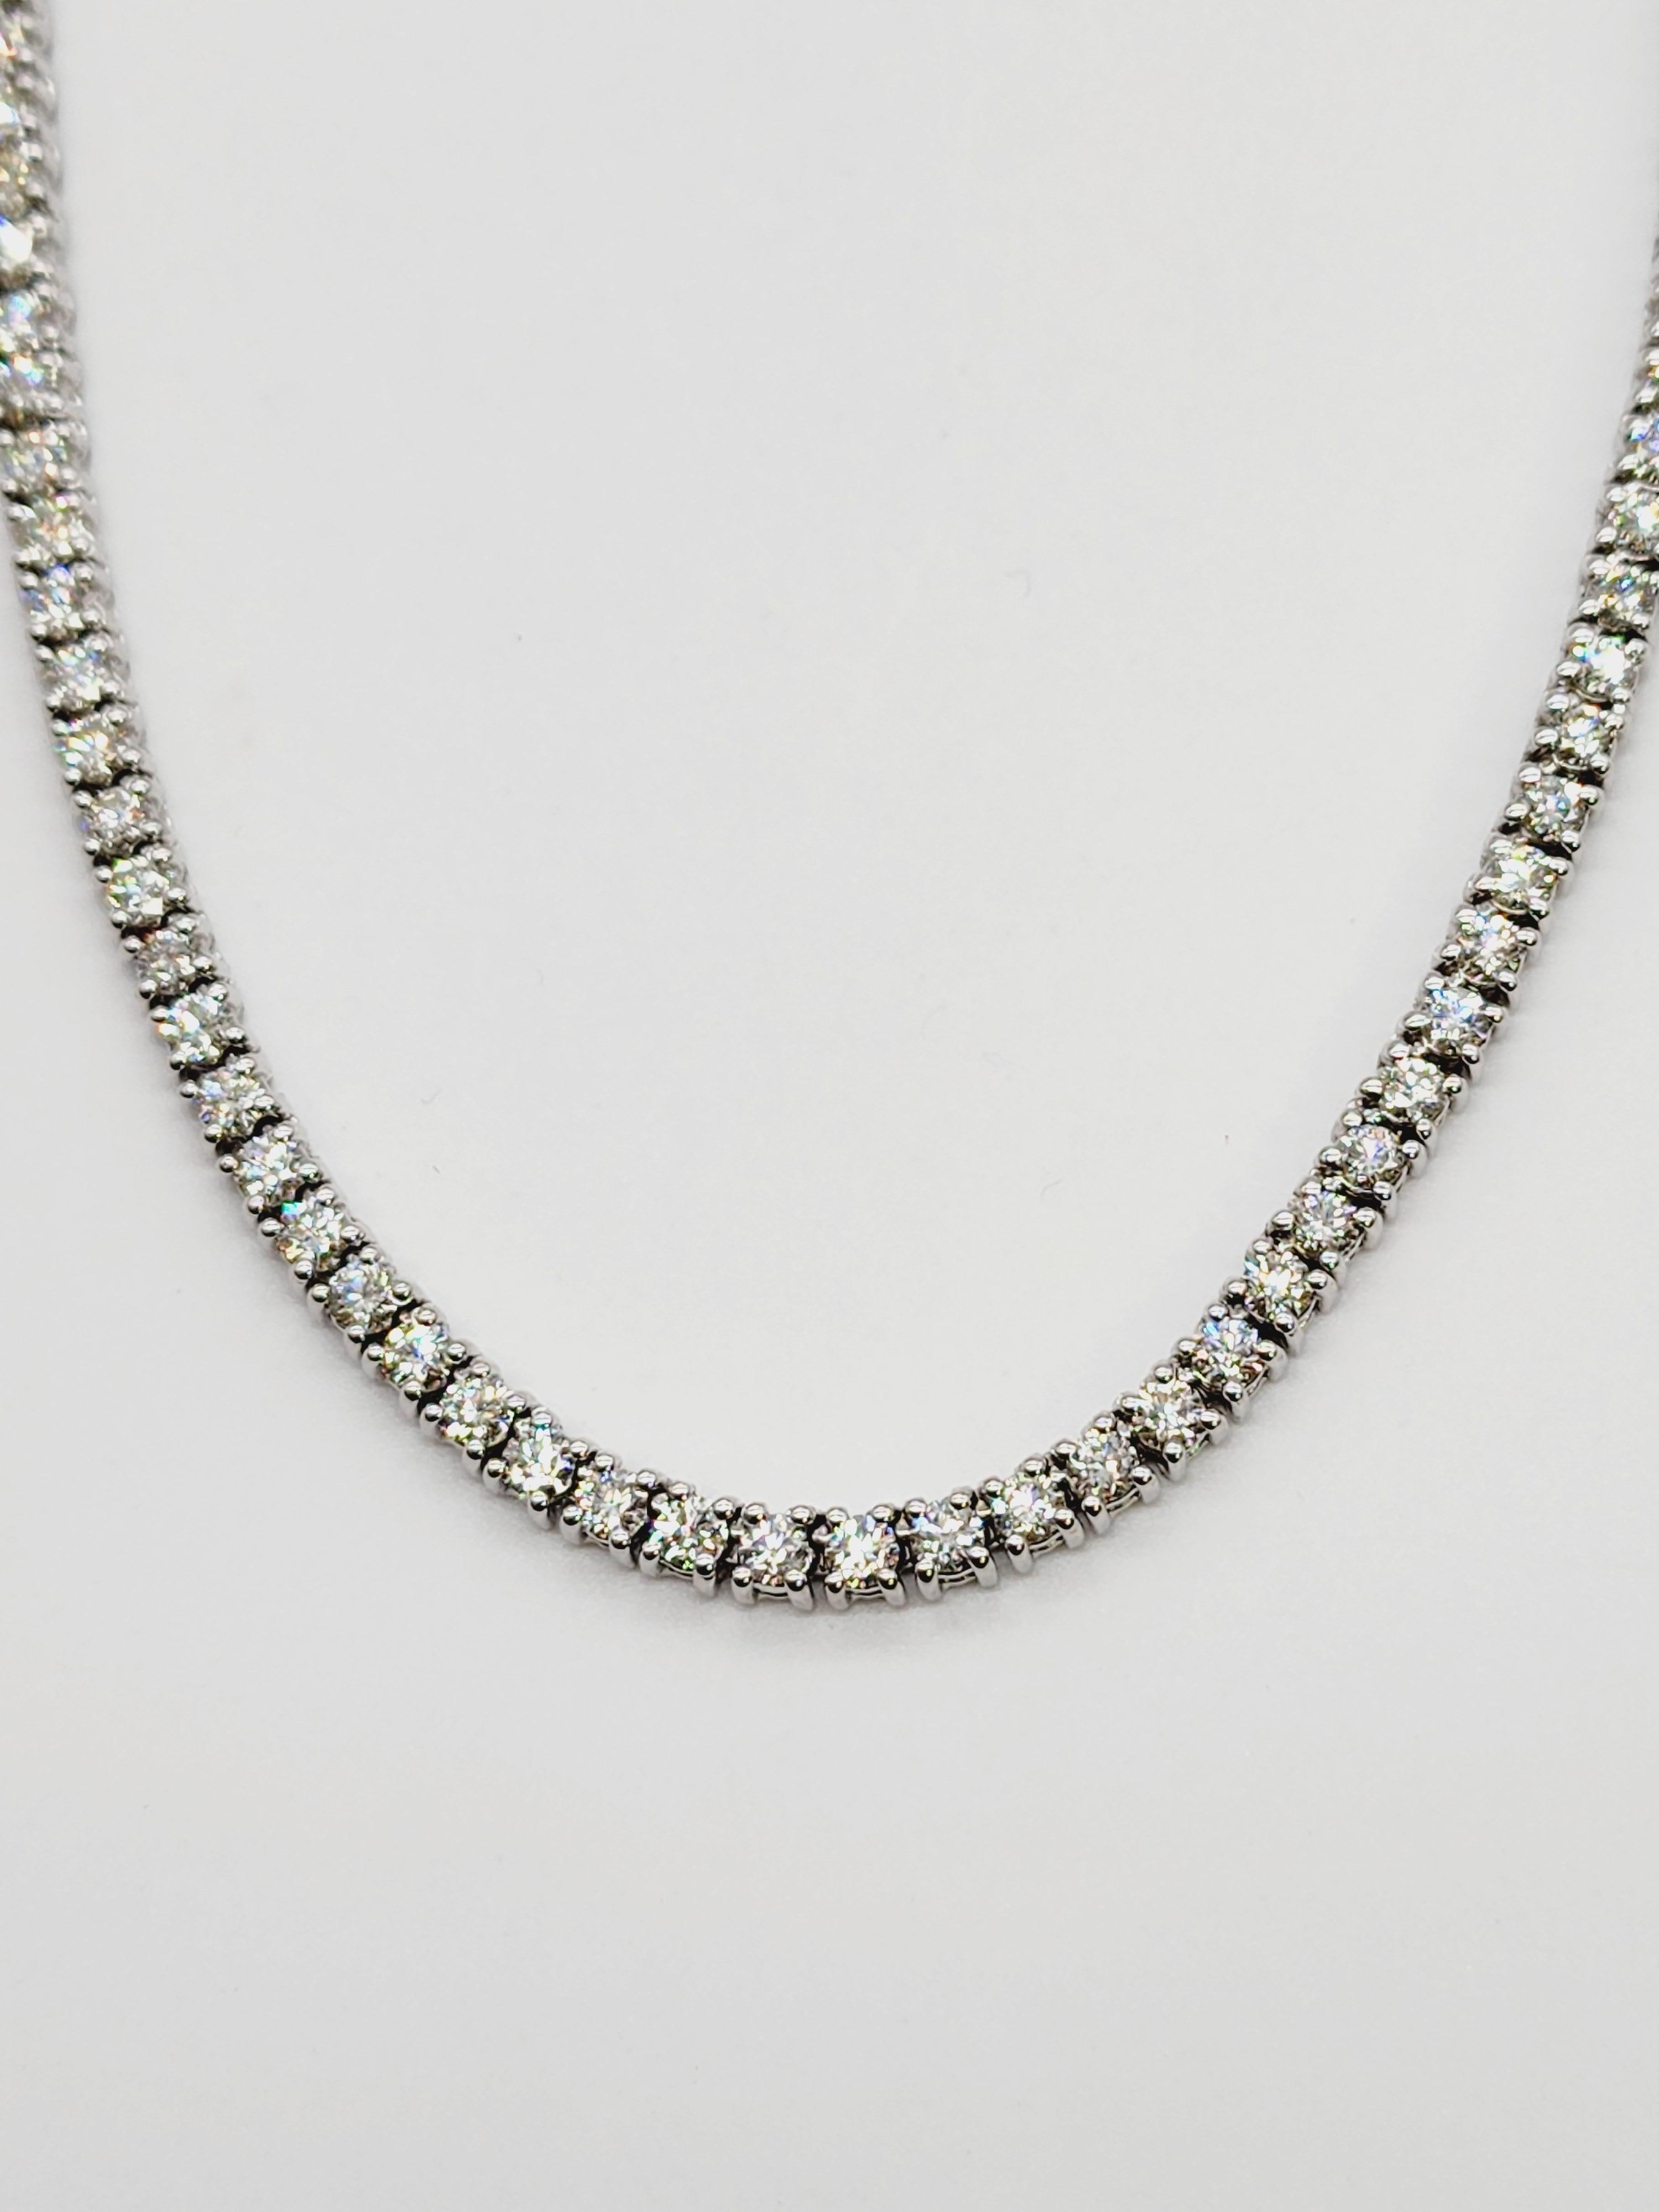 5.85 Carats Mini Diamond Tennis Necklace Chain 14 Karat White Gold 18'' In New Condition For Sale In Great Neck, NY